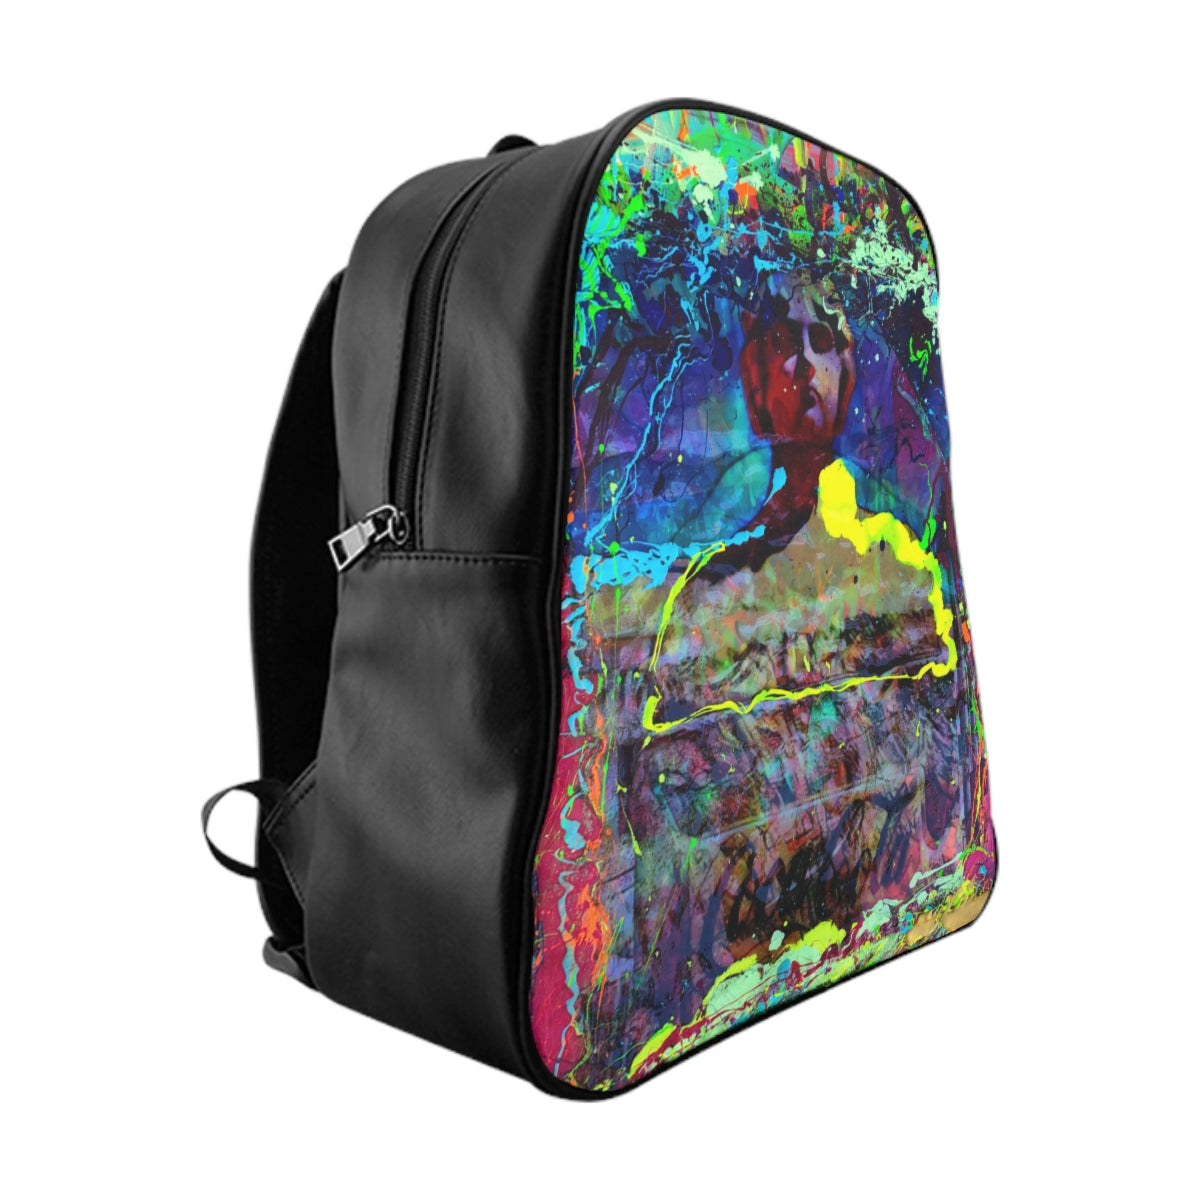 Getrott Eddy Bogaert Halloween statue Coca Cola Graffiti Art Collection Poster 2 Black School Backpack Carry-On Travel Check Luggage 4-Wheel Spinner Suitcase Bag Multiple Colors and Sizes